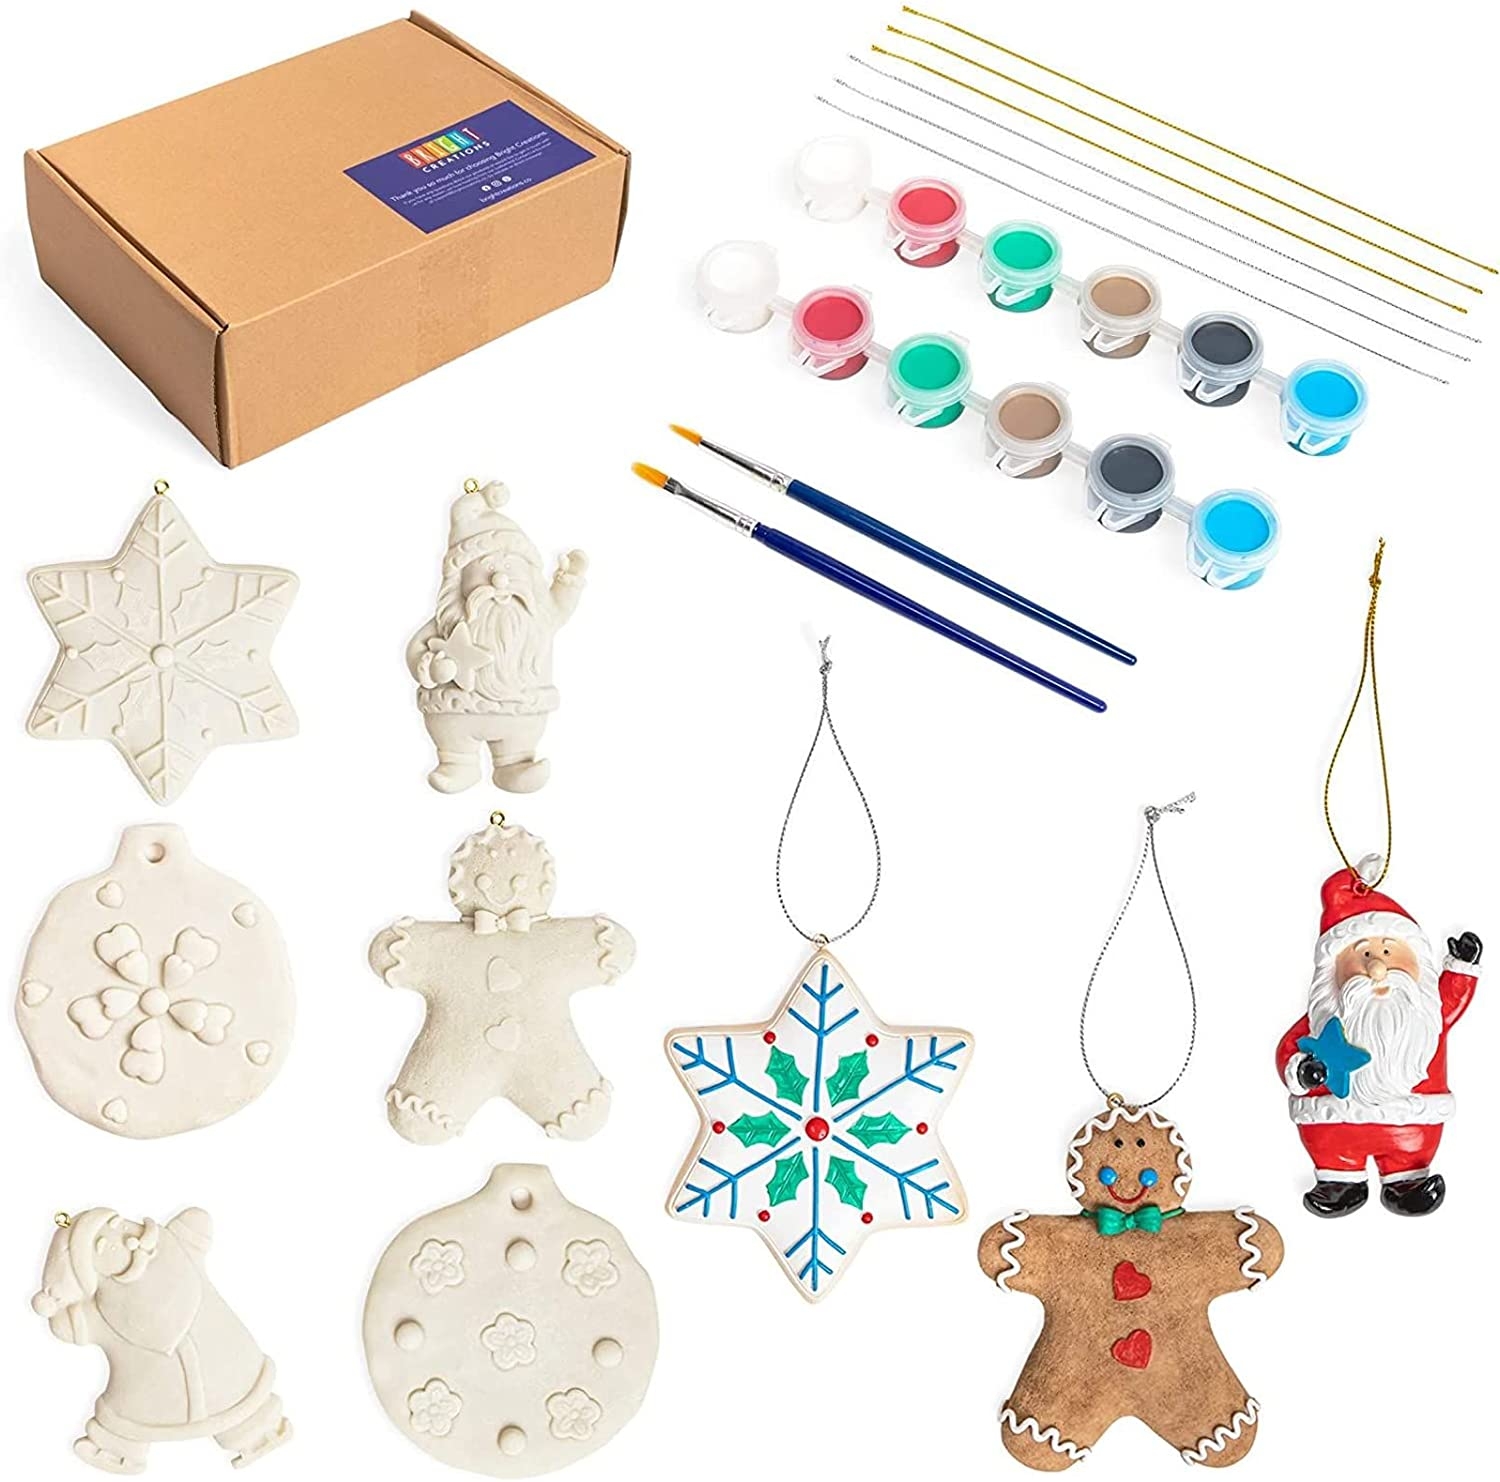 DIY Paint Your Own Ceramics for Kids, Ready to Paint Holiday Ornaments (26 Pieces) Import To Shop ×Product customization